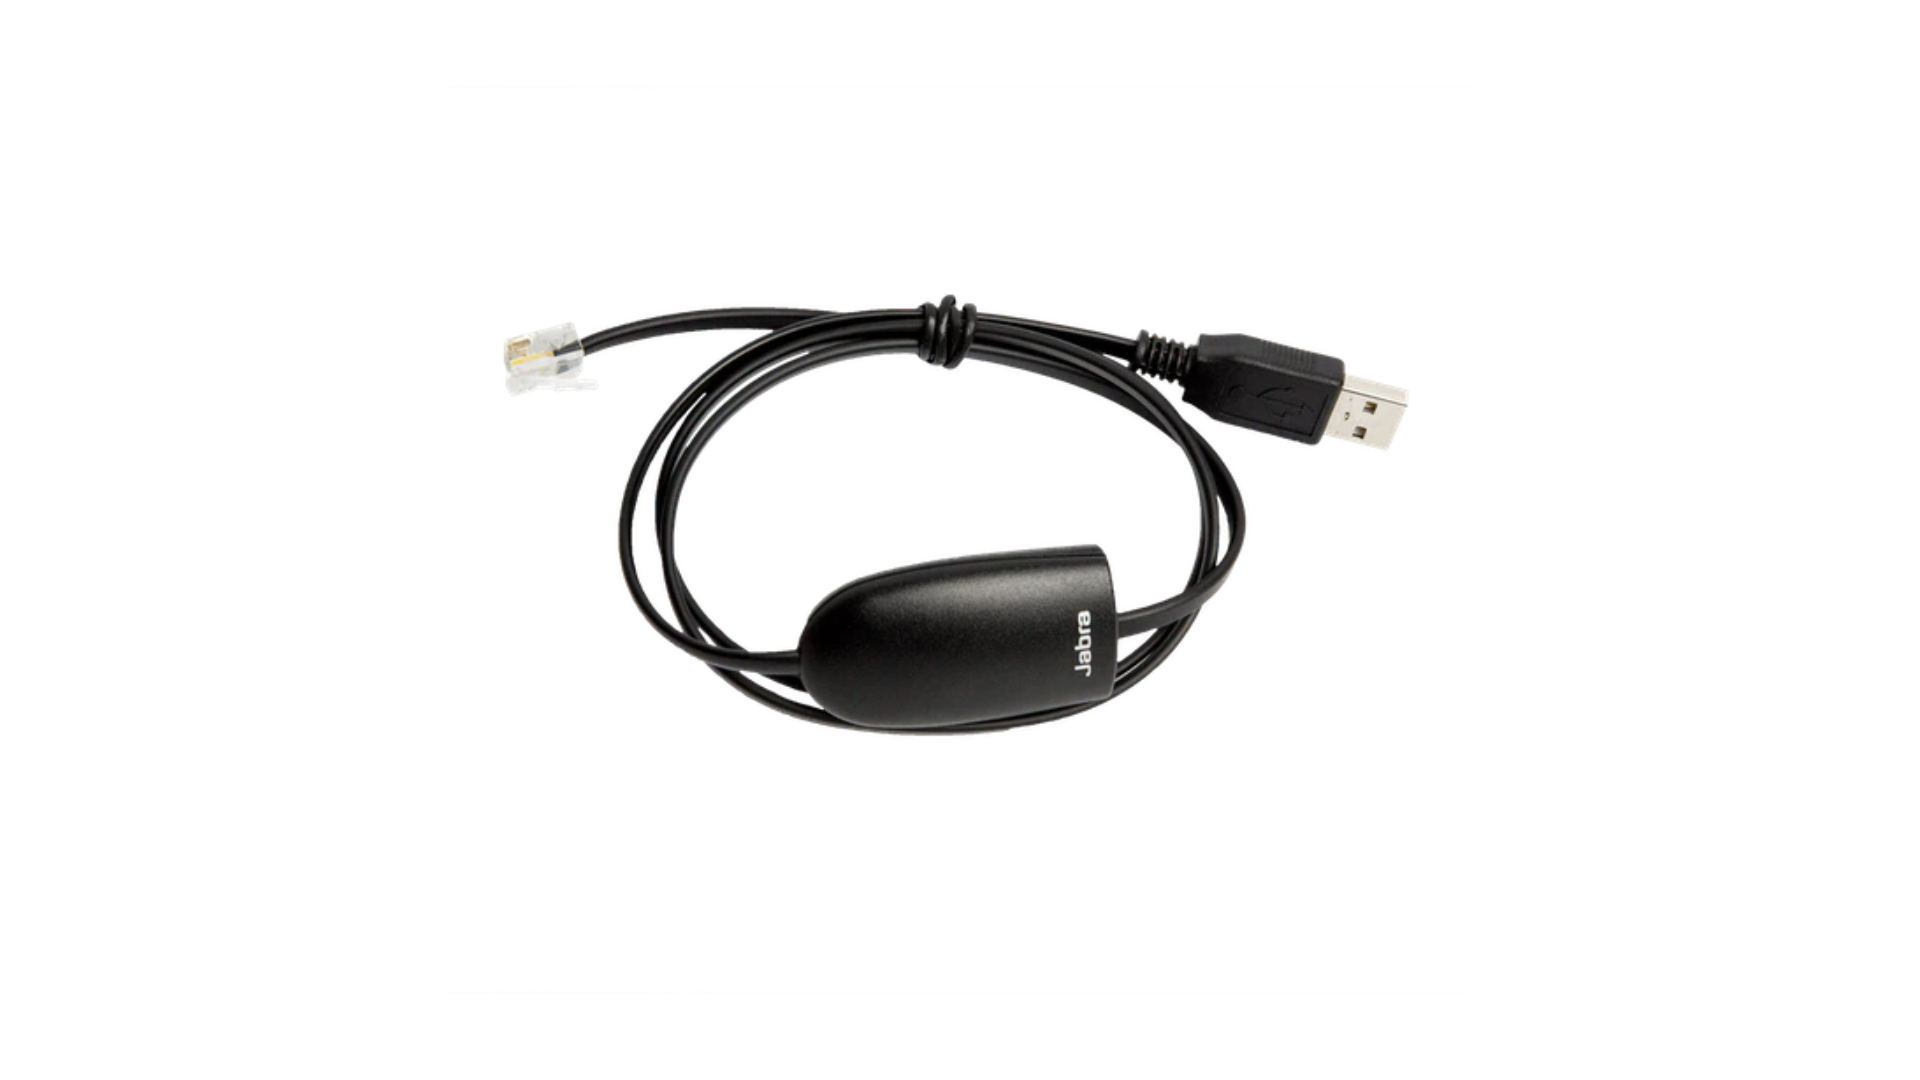 PRO 920/925 RJ to USB Service Cable